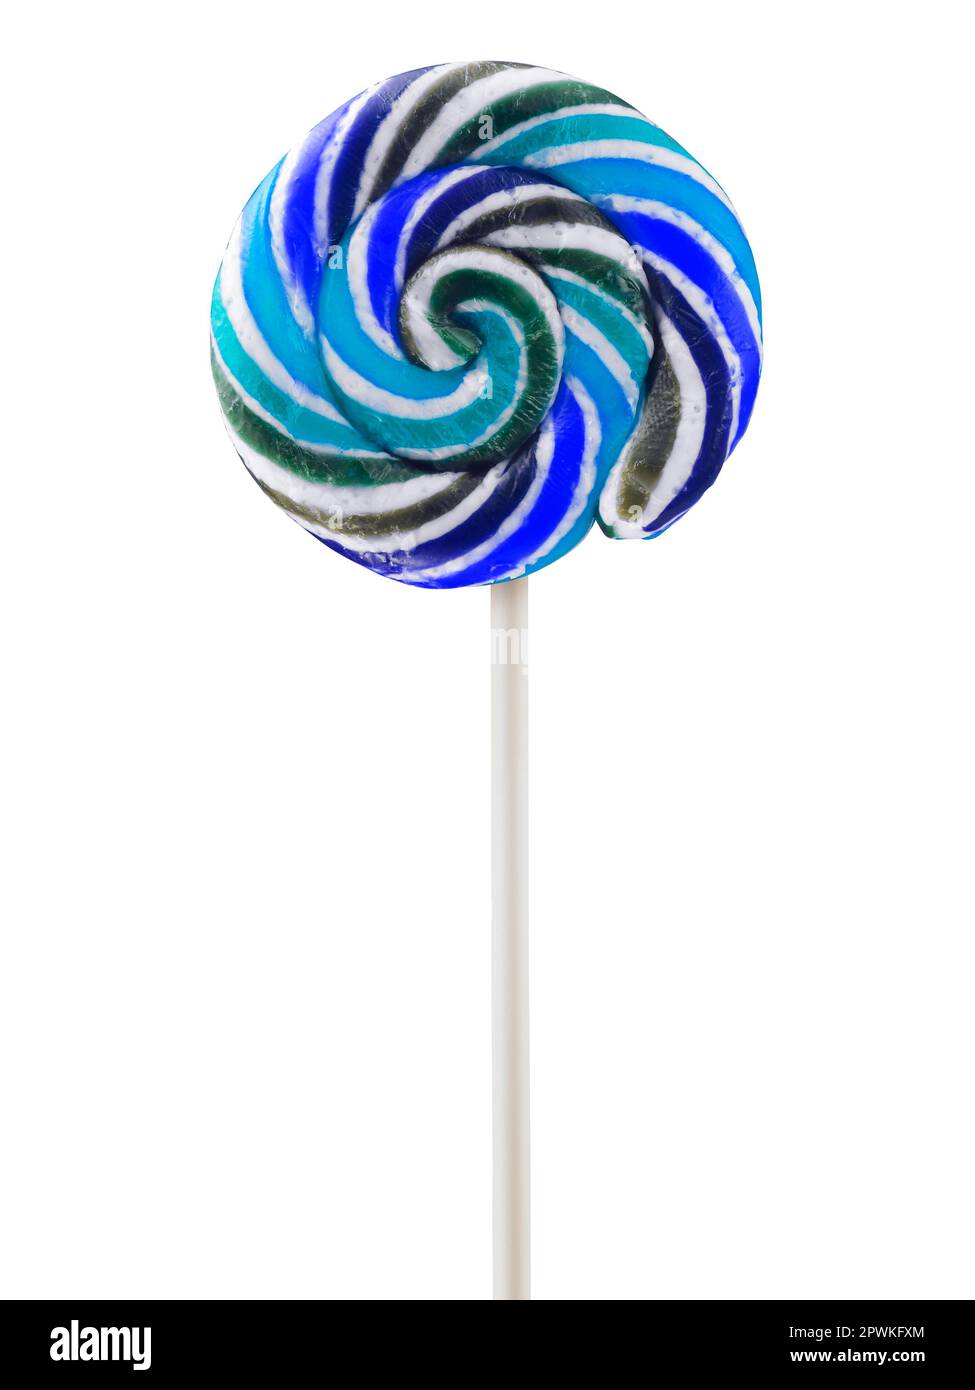 Giant Magnifying Glass Lollipop